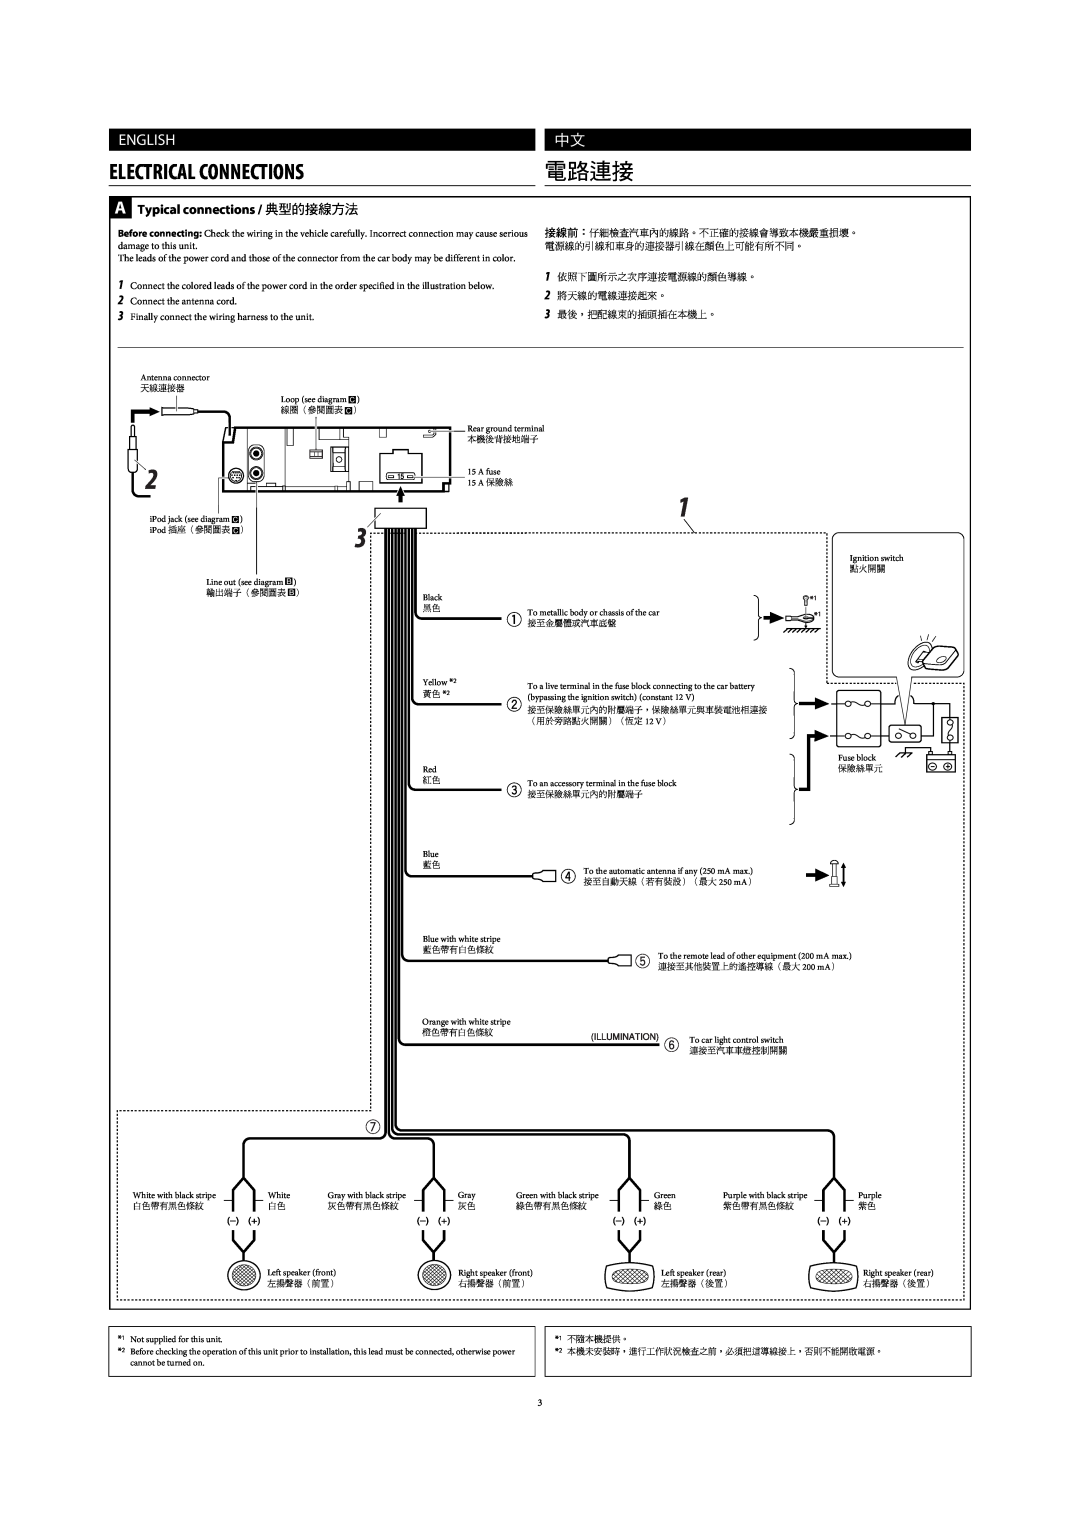 JVC GET0425-001A manual 電路連接, Typical connections / 典型的接線方法, Electrical Connections, English 